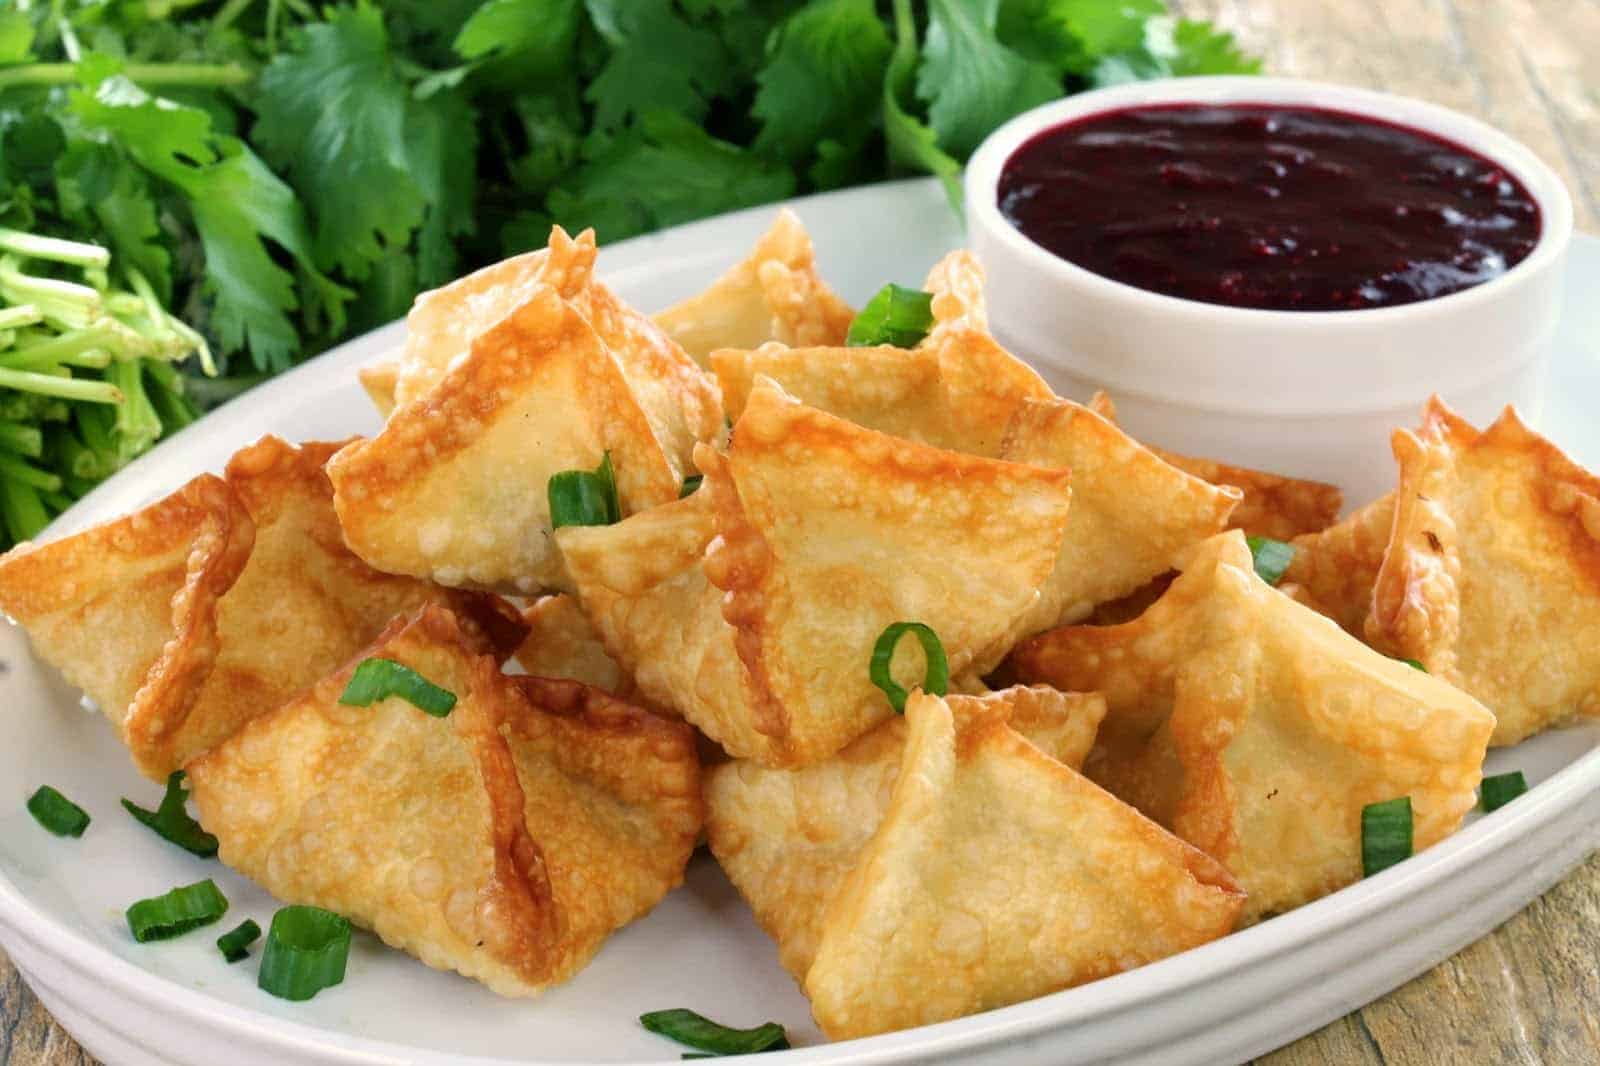 Crab Rangoons on a white plate with a dipping sauce.